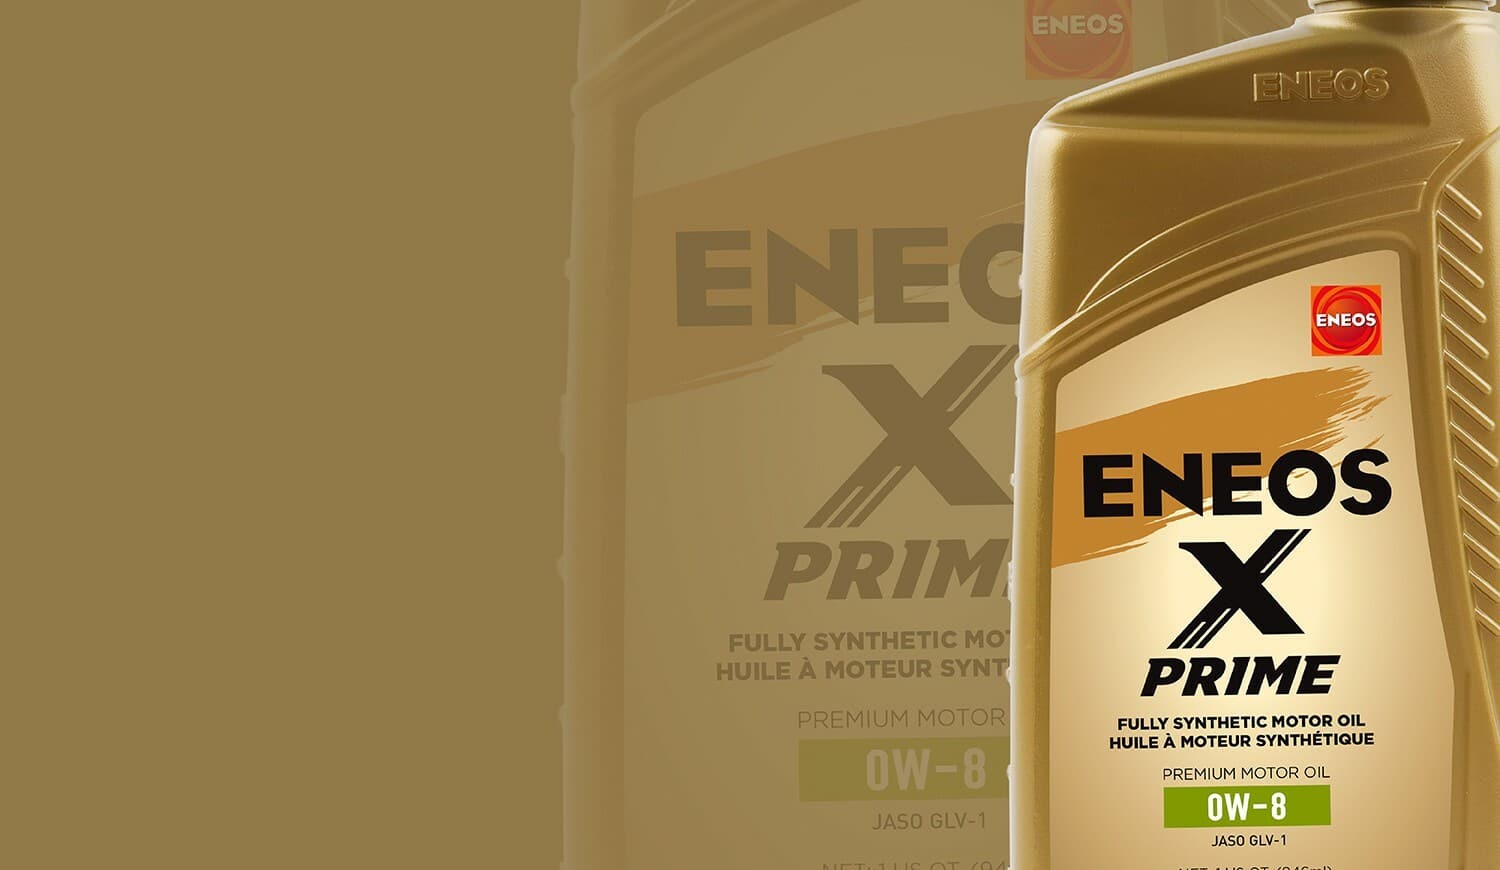 ENEOS 0W-8 Now Available, Performance Motor Oil & Transmission Fluid